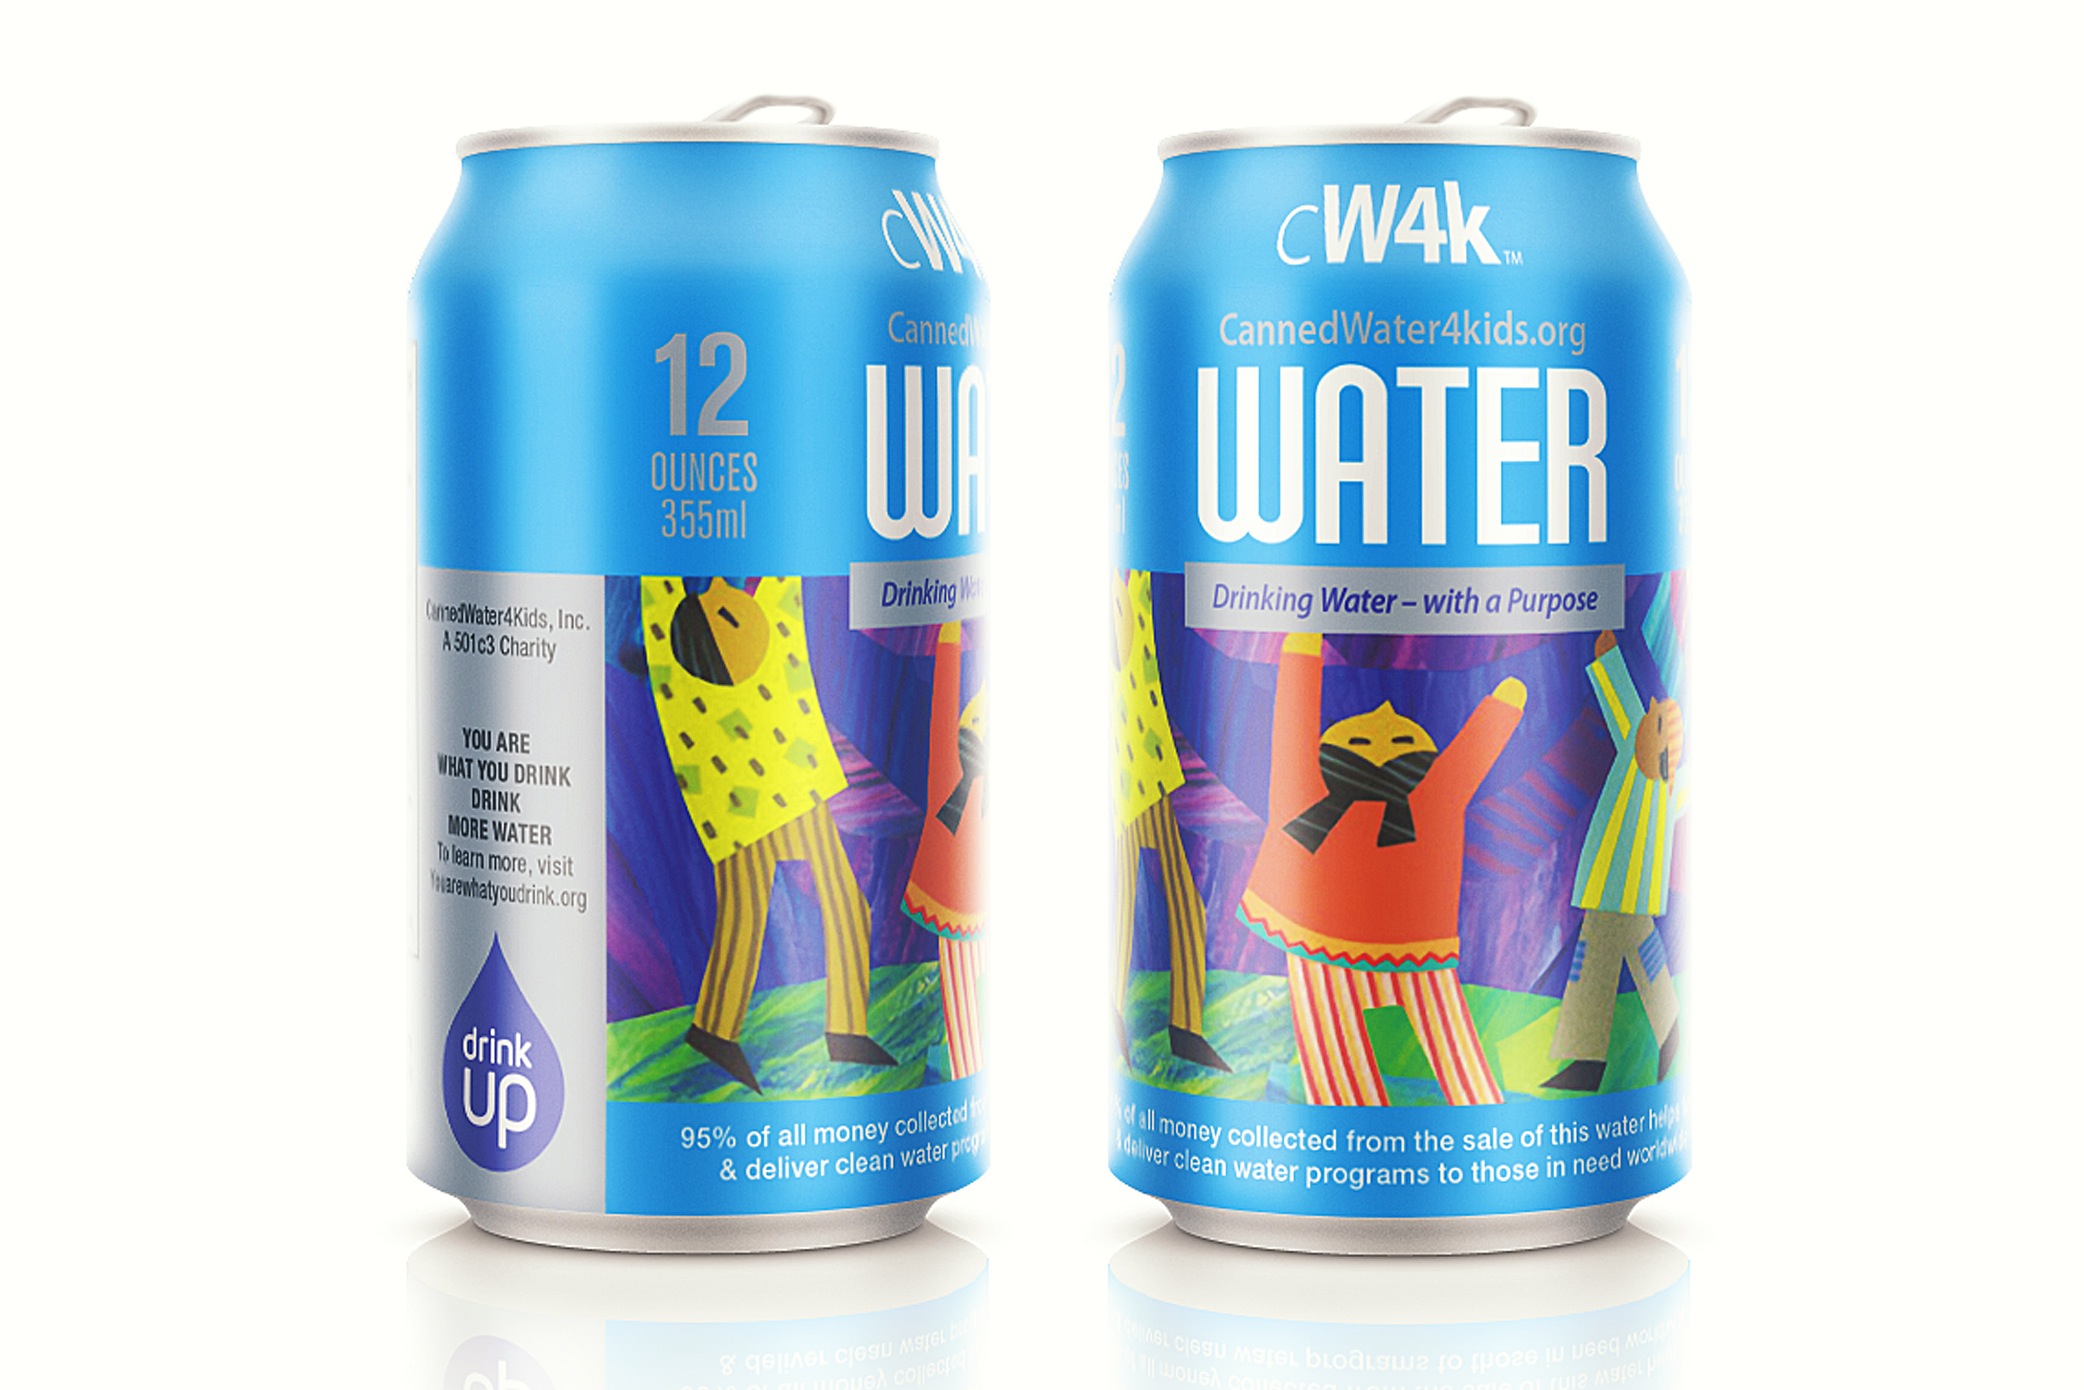 12oz cannedwater4kids (Cw4K) canned water